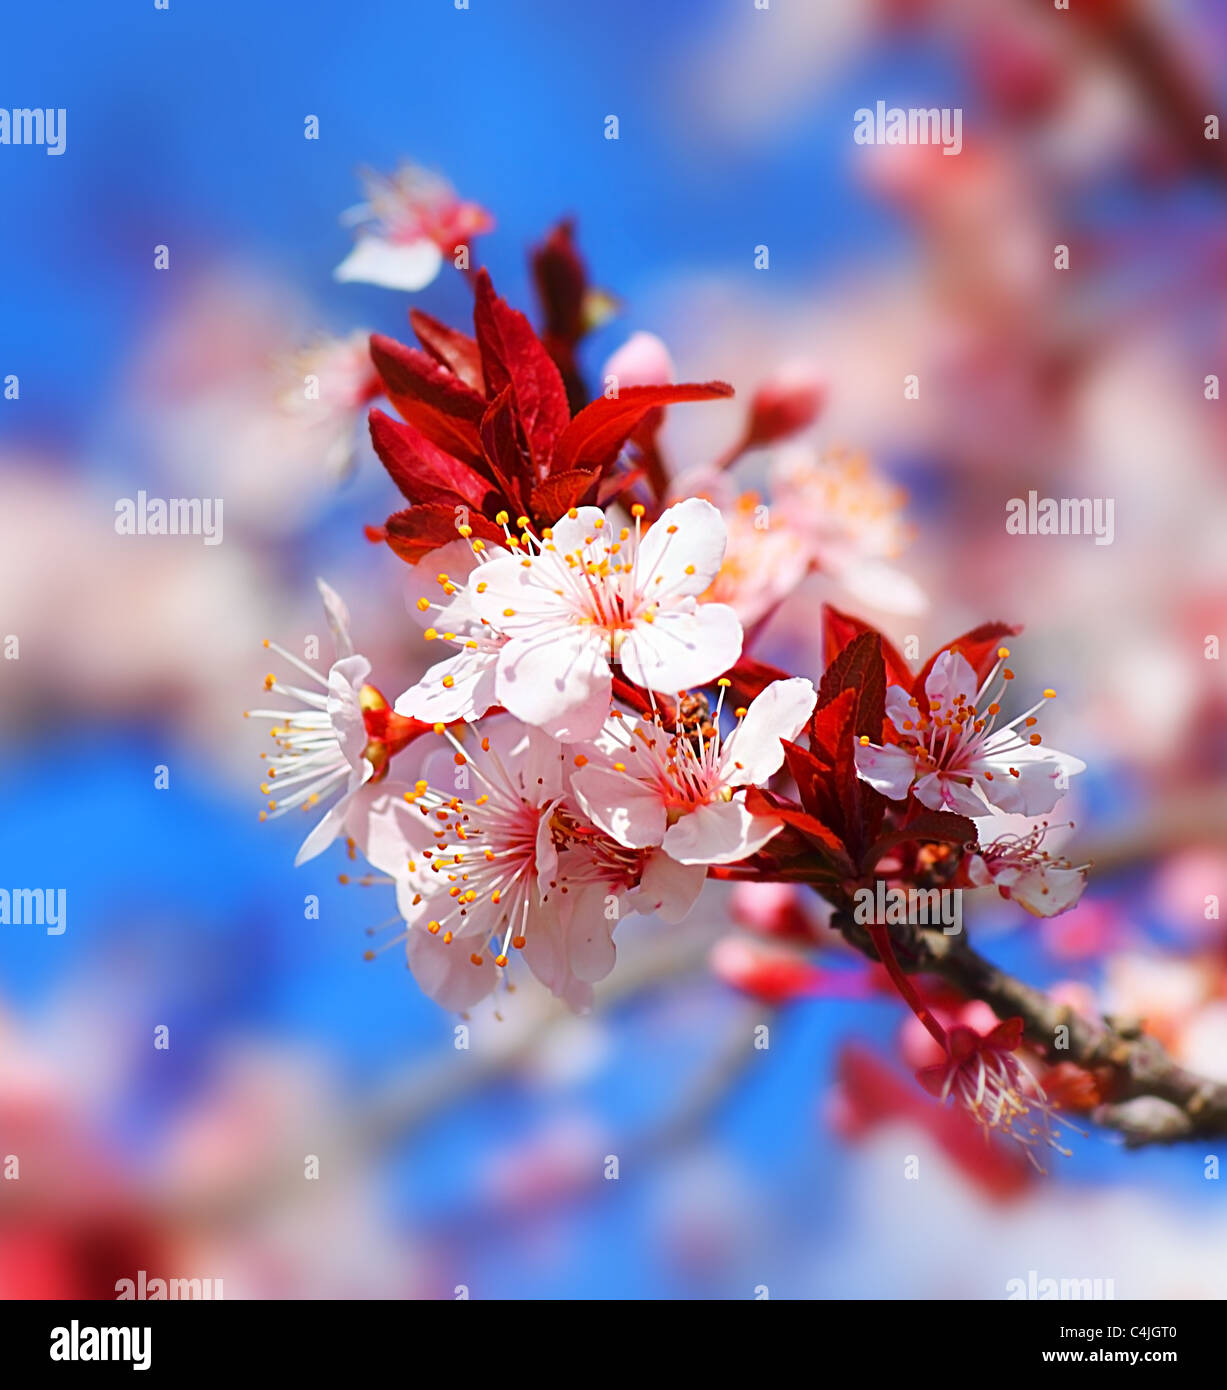 Cherry tree blossom flowers at spring over blue natural sky background Stock Photo